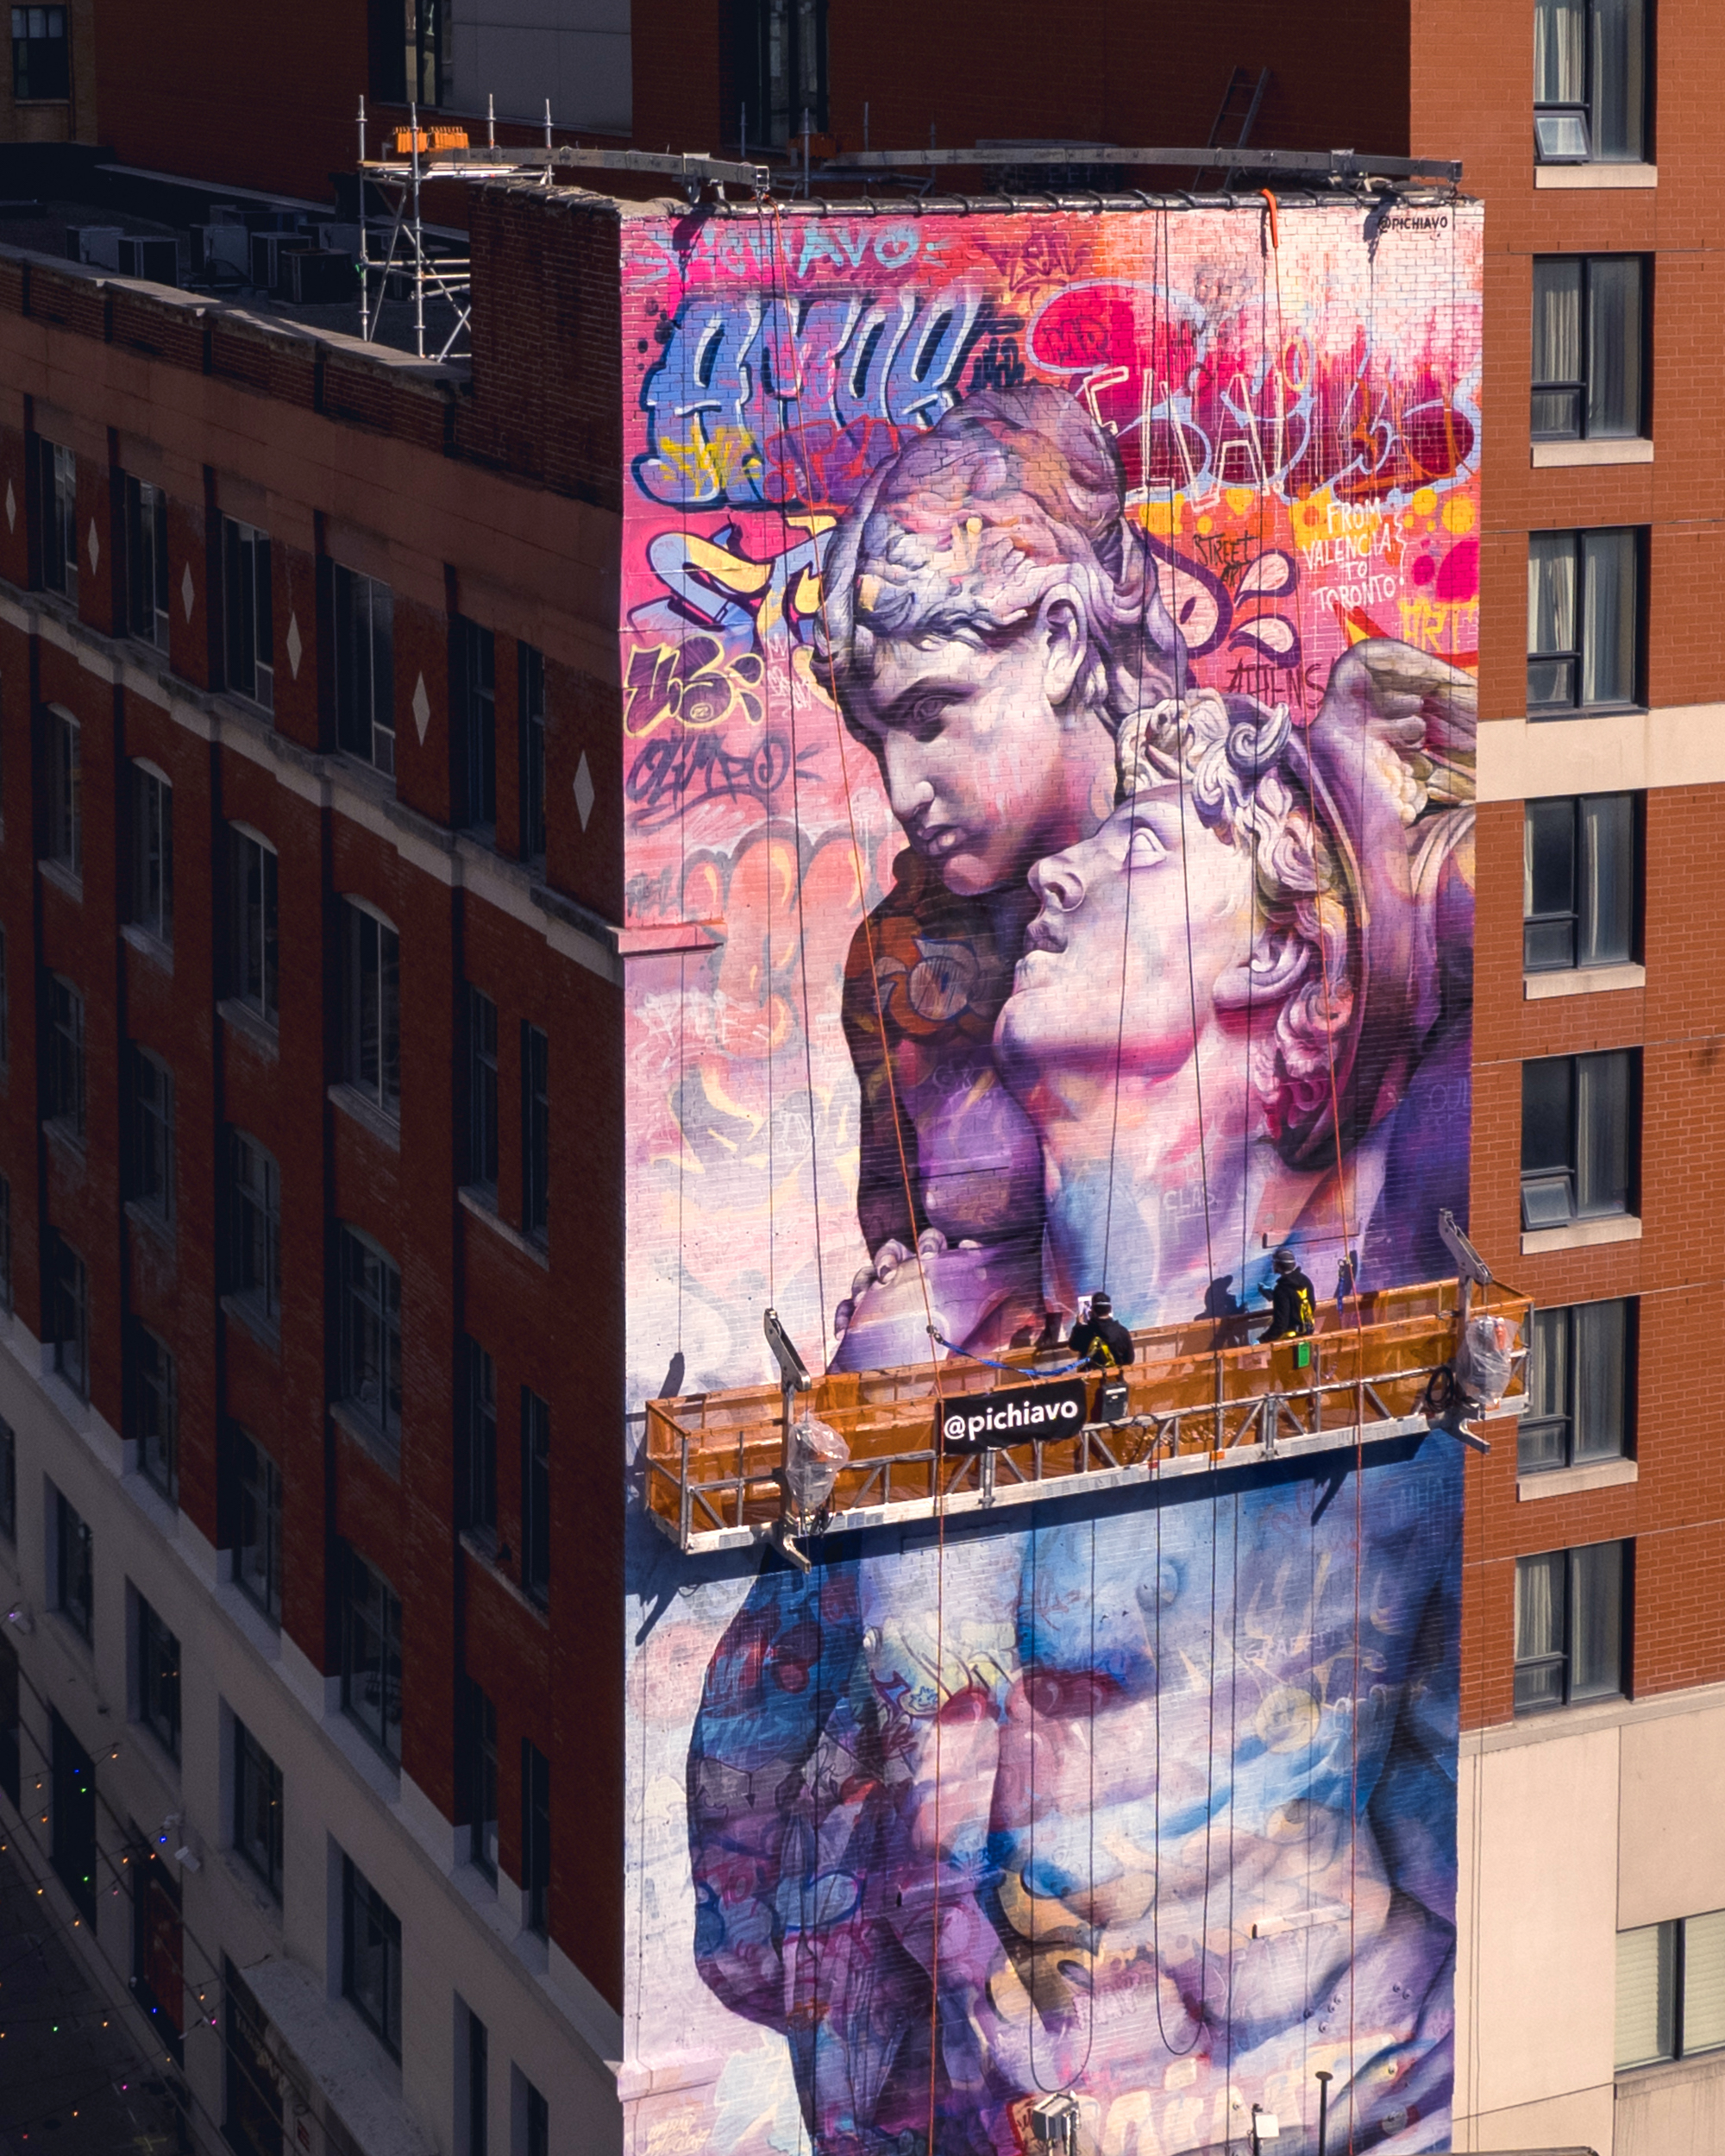 Artist duo PichiAvo on scaffolding, working on a mural of Mercury and Venus in Toronto.